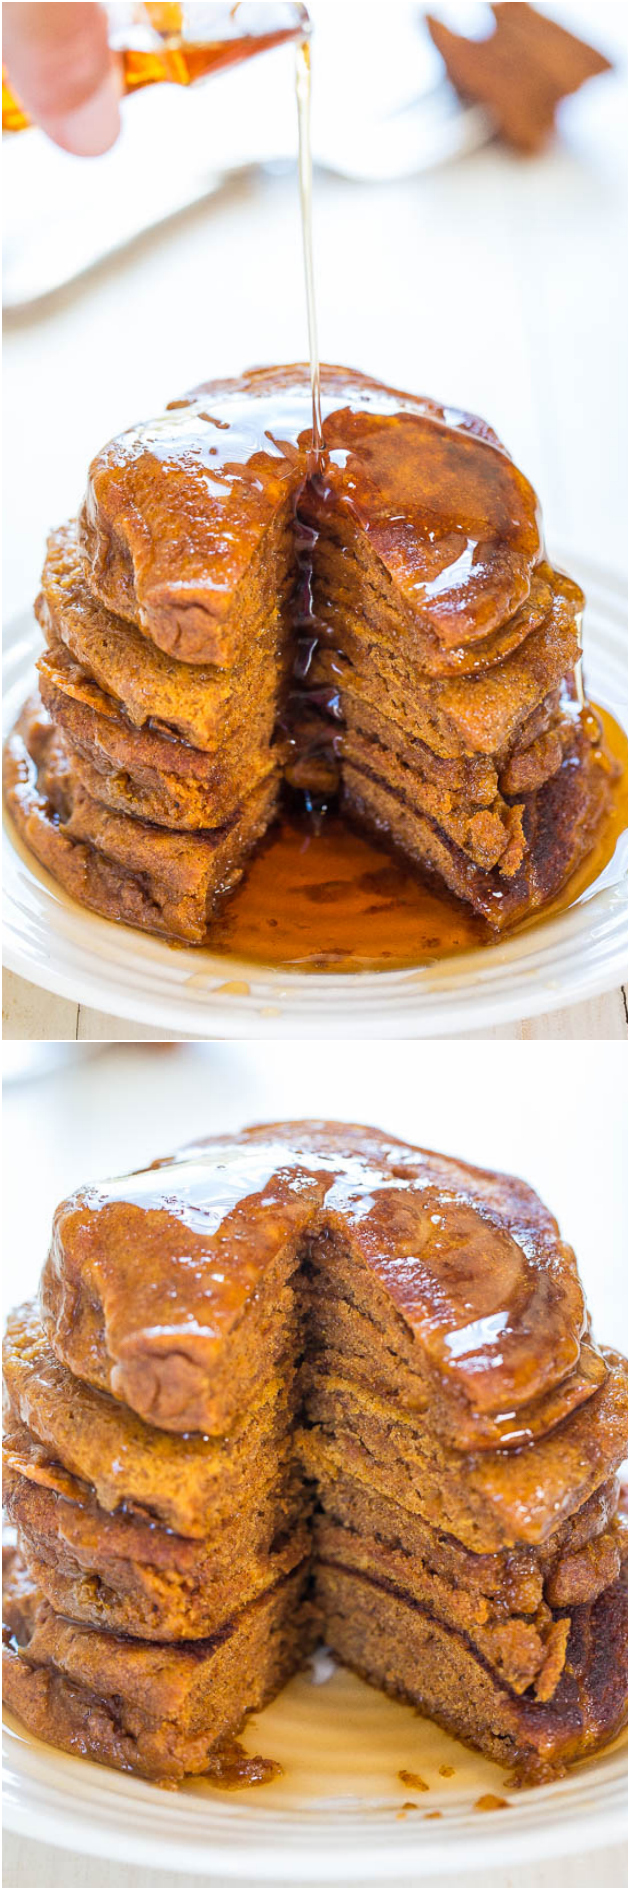 Pumpkin Pancakes - Soft, fluffy, and packed with big pumpkin flavor! Perfect comfort food for chilly mornings when a smoothie just won't do!